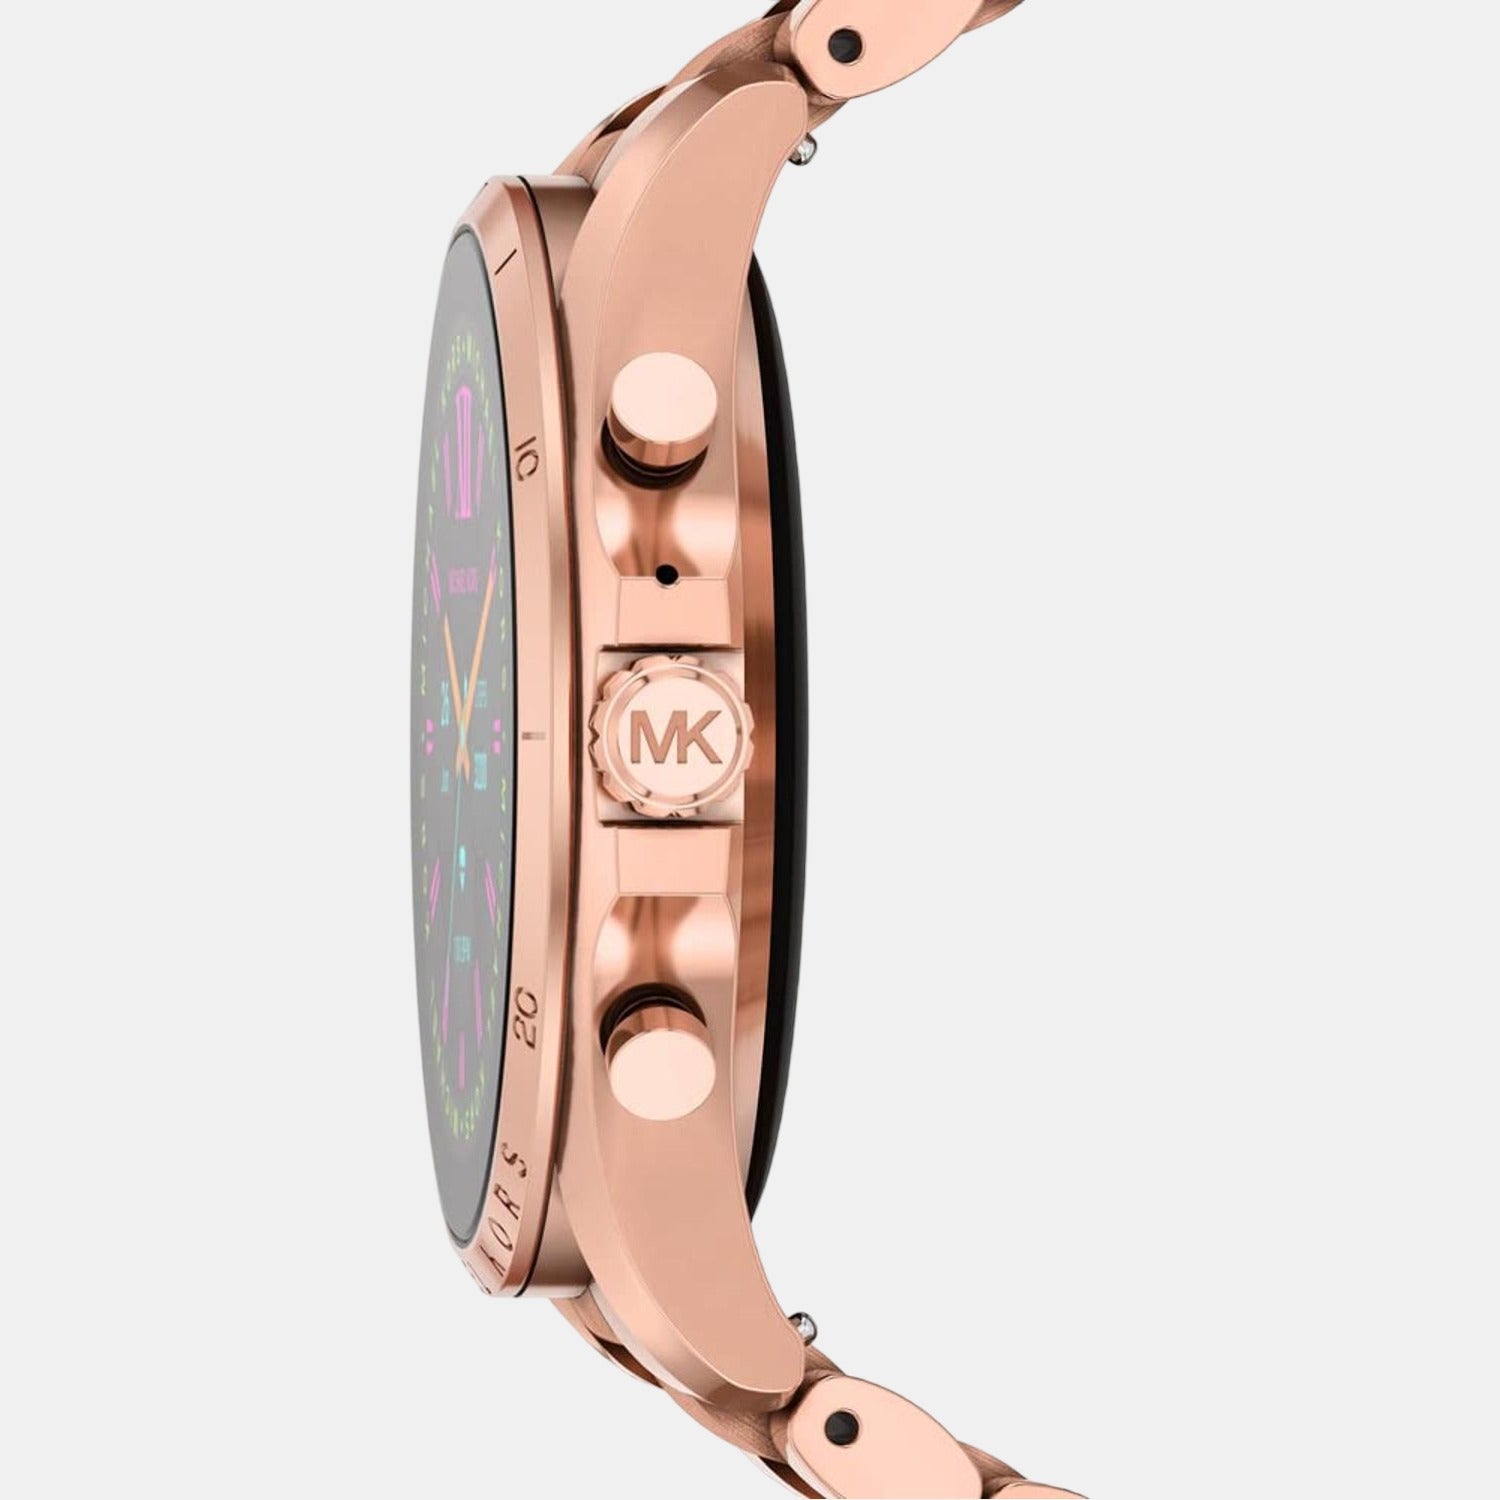 Michael Kors MKT5004 Access Bradshaw Rose Gold Tone Touchscreen Smartwatch  from USA Womens Fashion Watches  Accessories Watches on Carousell